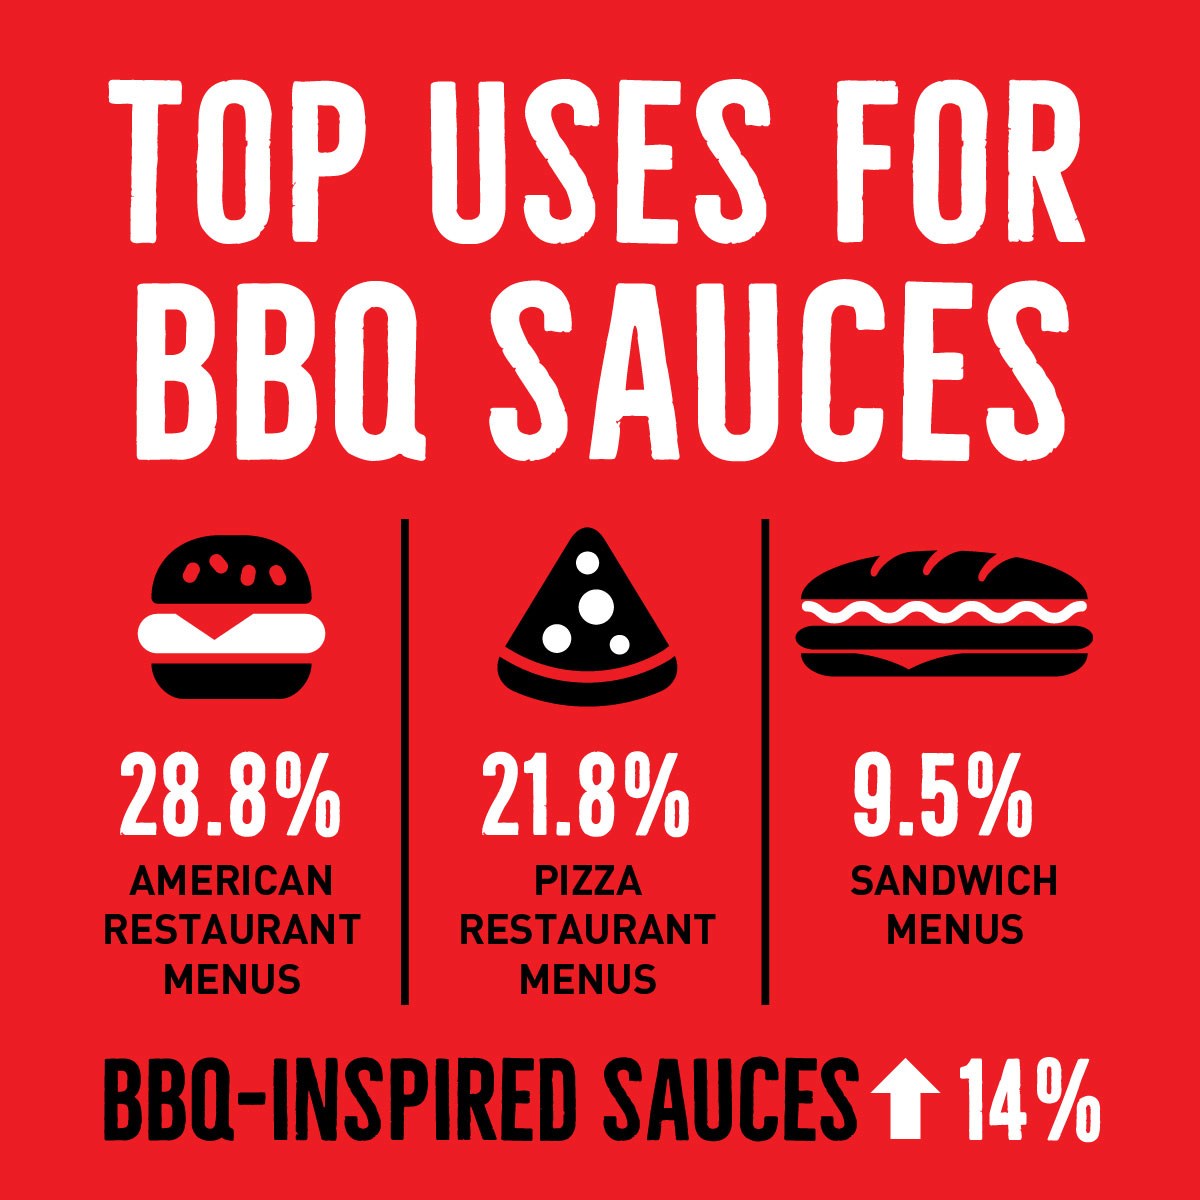 Top uses for BBQ sauces